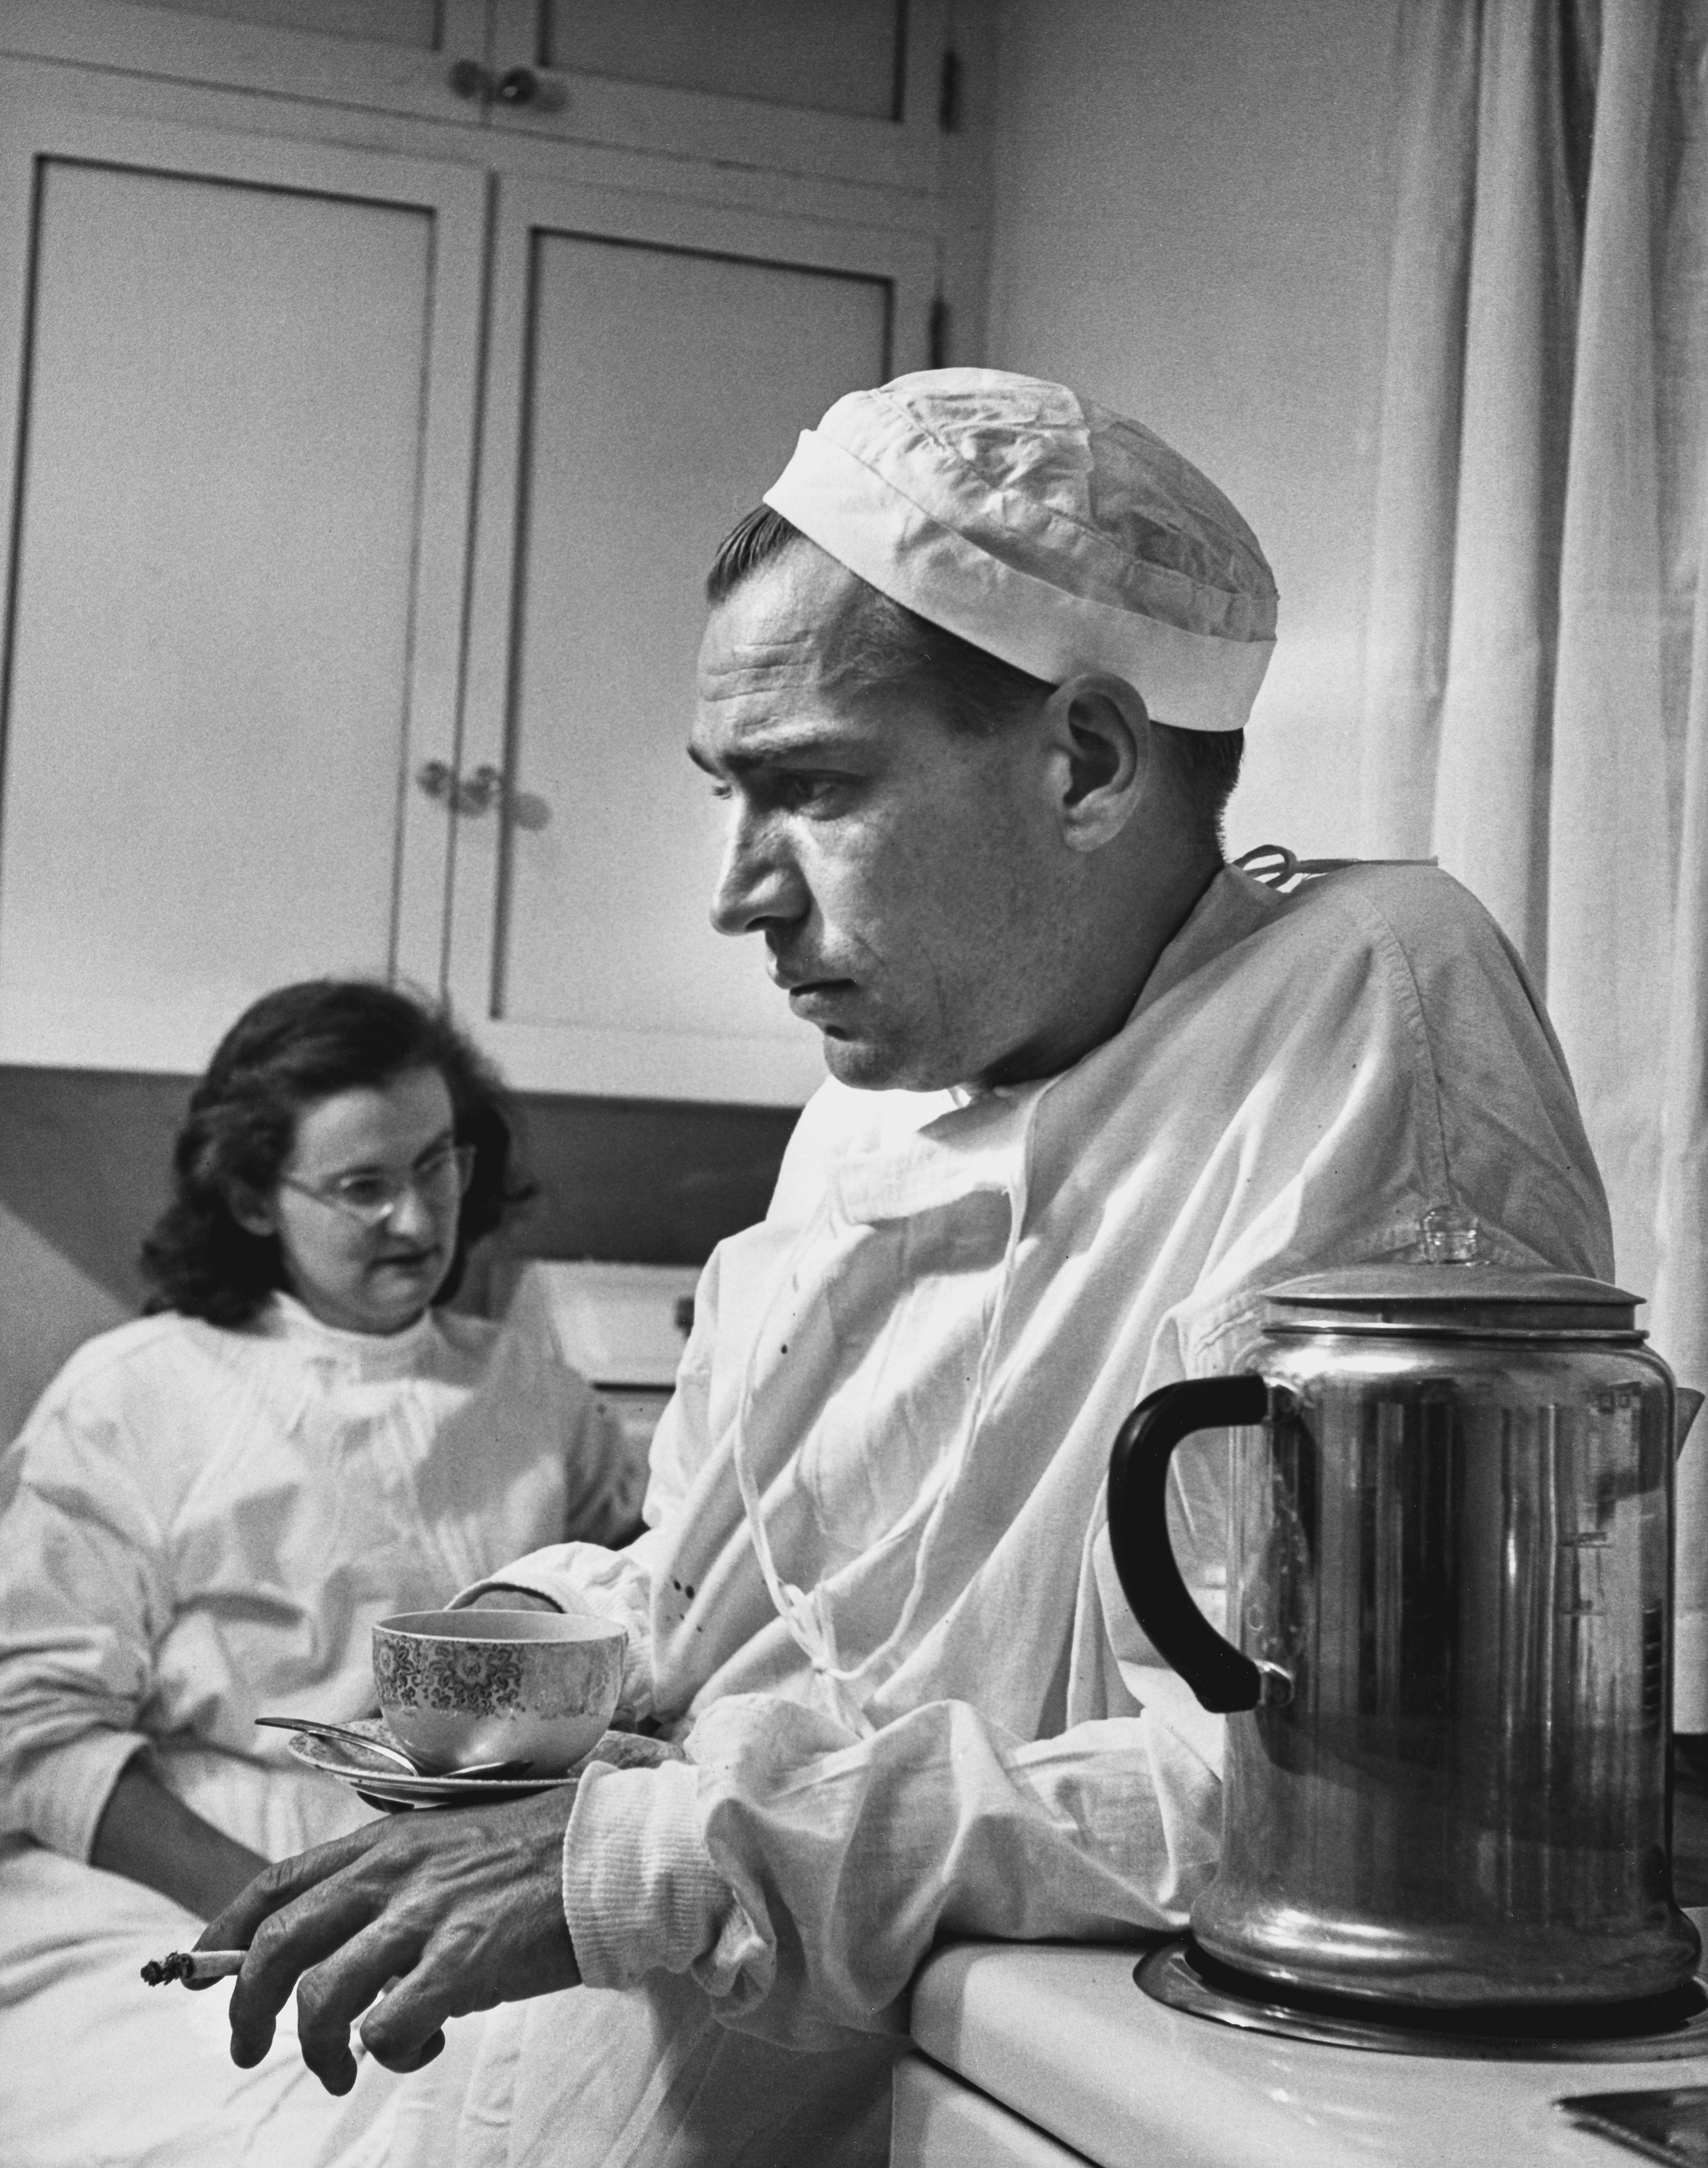 Country Doctor - Dr. Ernest Ceriani with Coffee, Cigarette, and Nurse in Hospital Kitchen